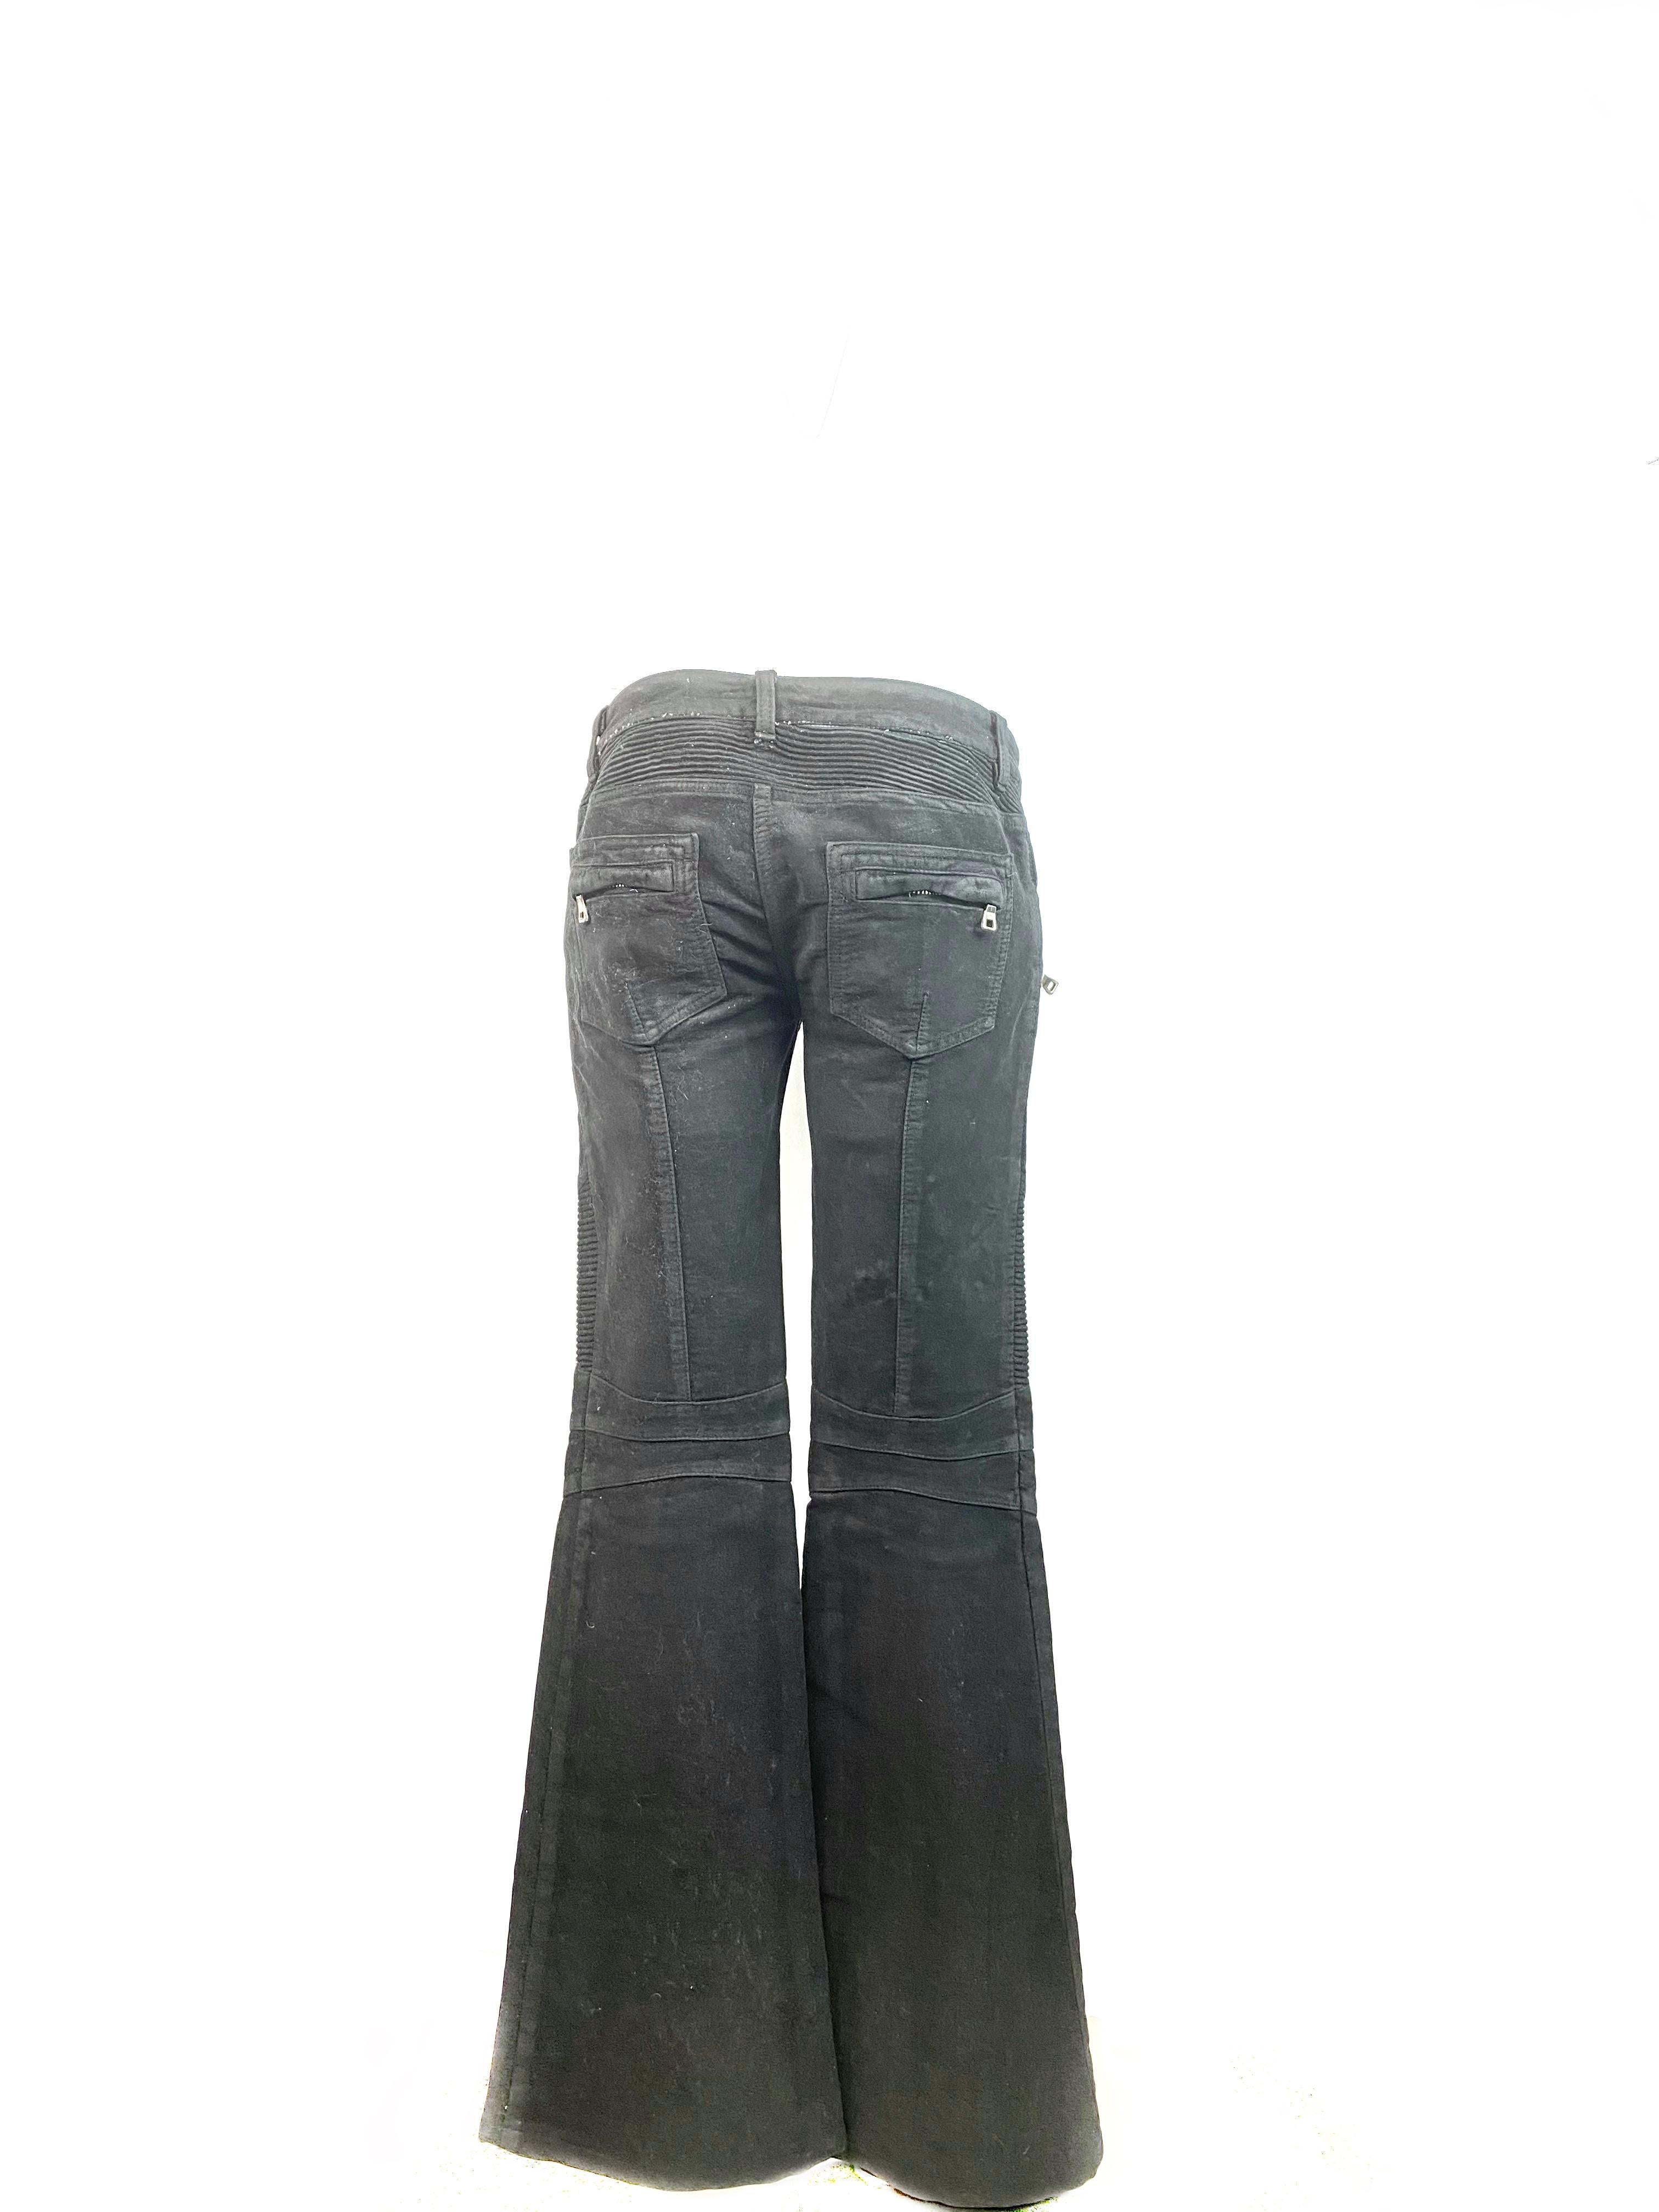 Balmain Black Suede Flare Jeans Pant Size 40 In Excellent Condition For Sale In Beverly Hills, CA